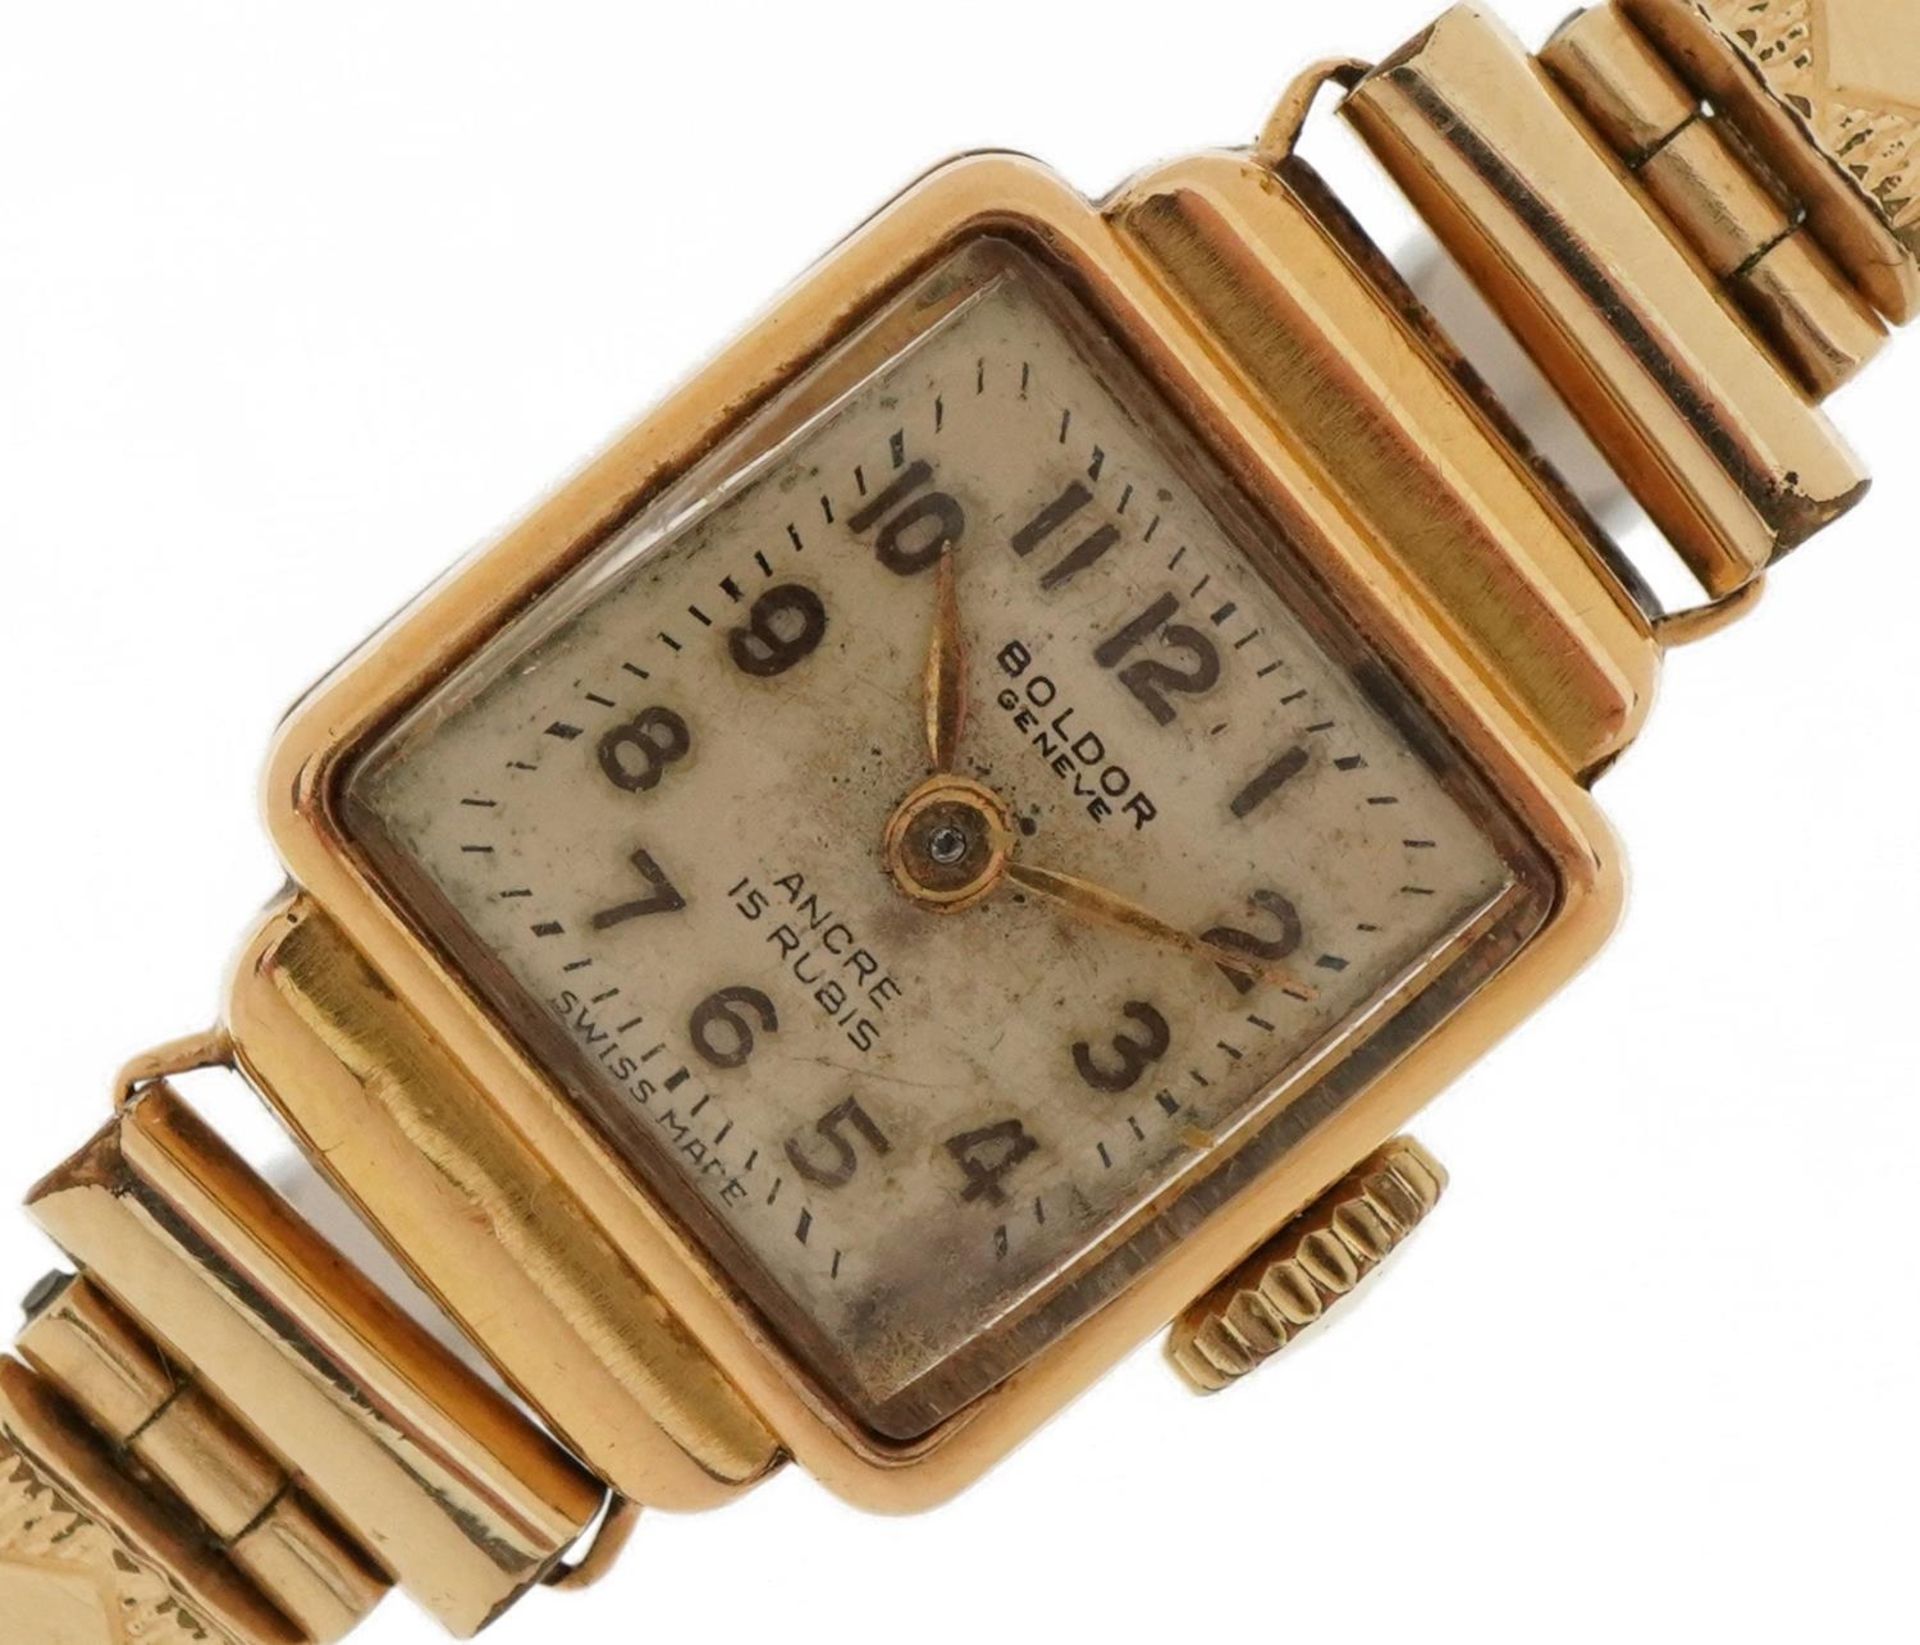 Boldor, ladies Art Deco 18ct gold manual wristwatch, 15mm wide : For further information on this lot